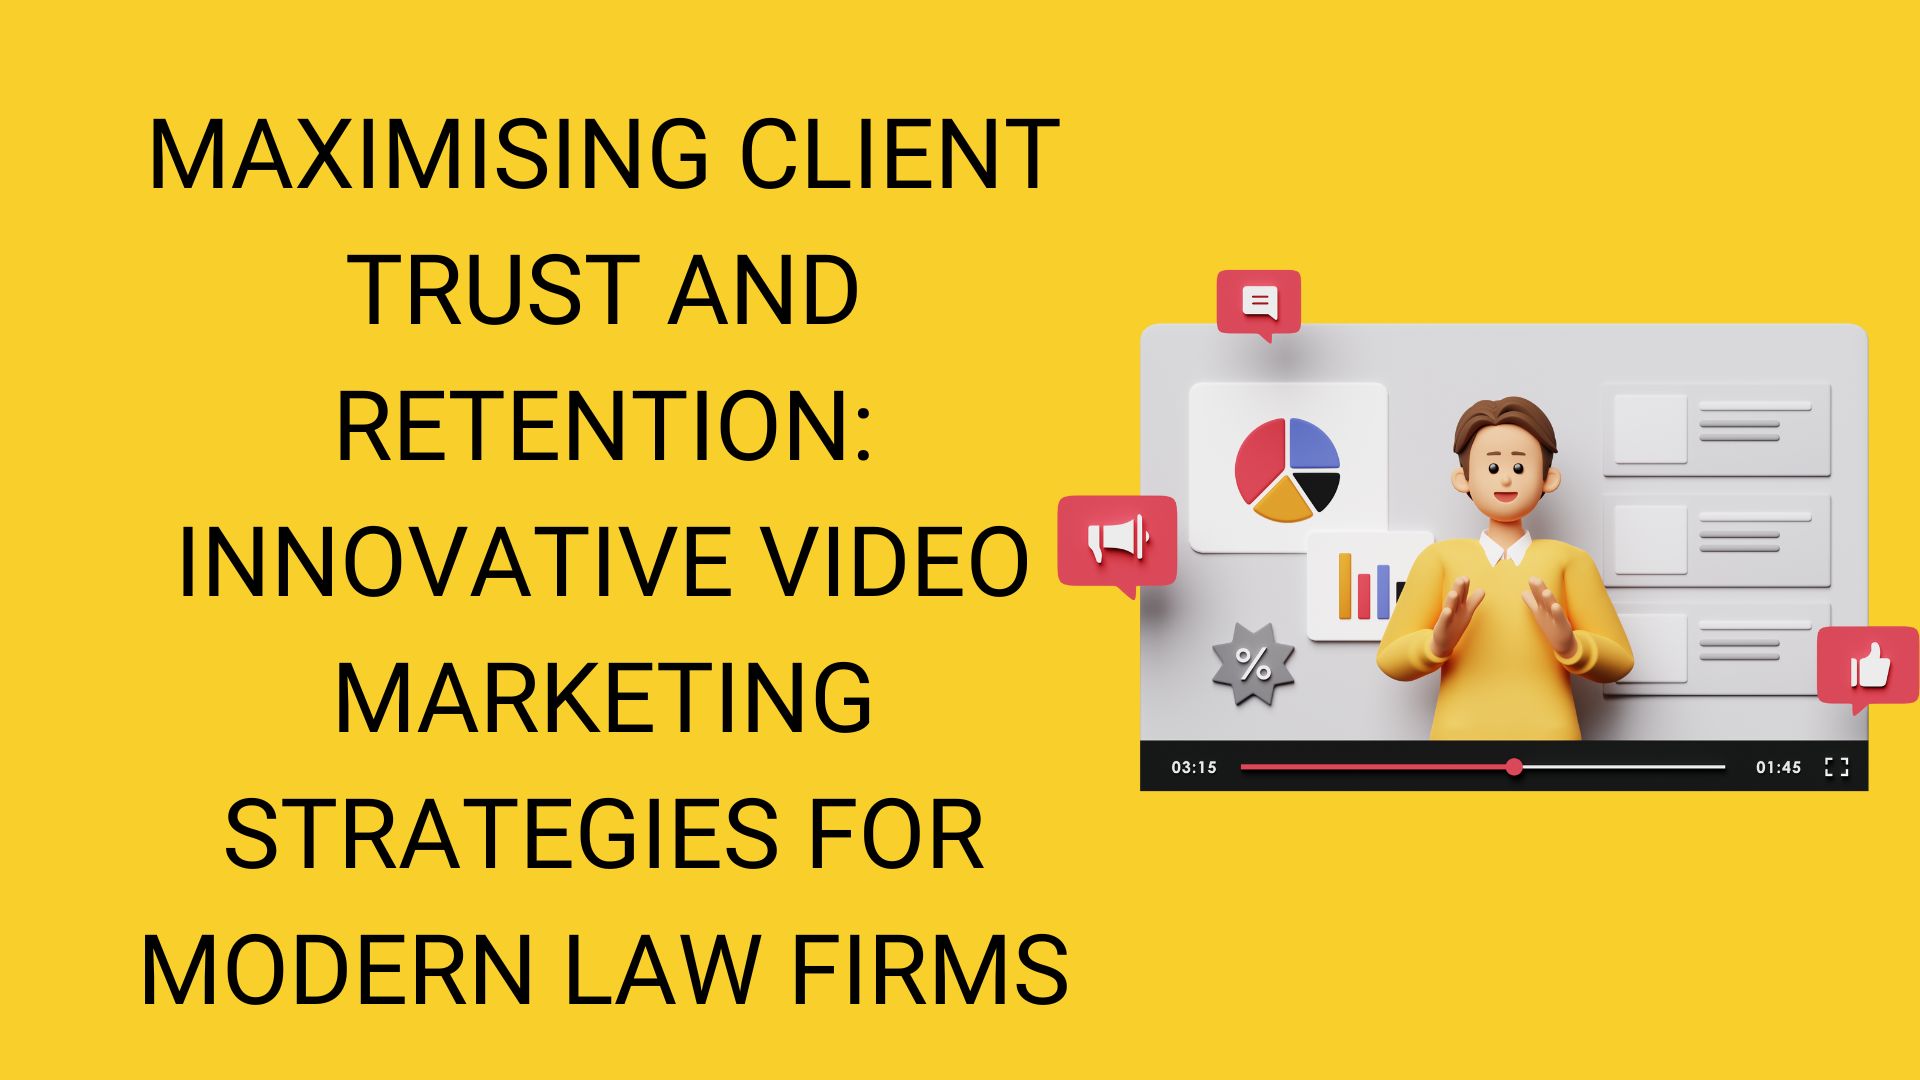 Maximising Client Trust and Retention: Innovative Video Marketing Strategies for Modern Law Firms